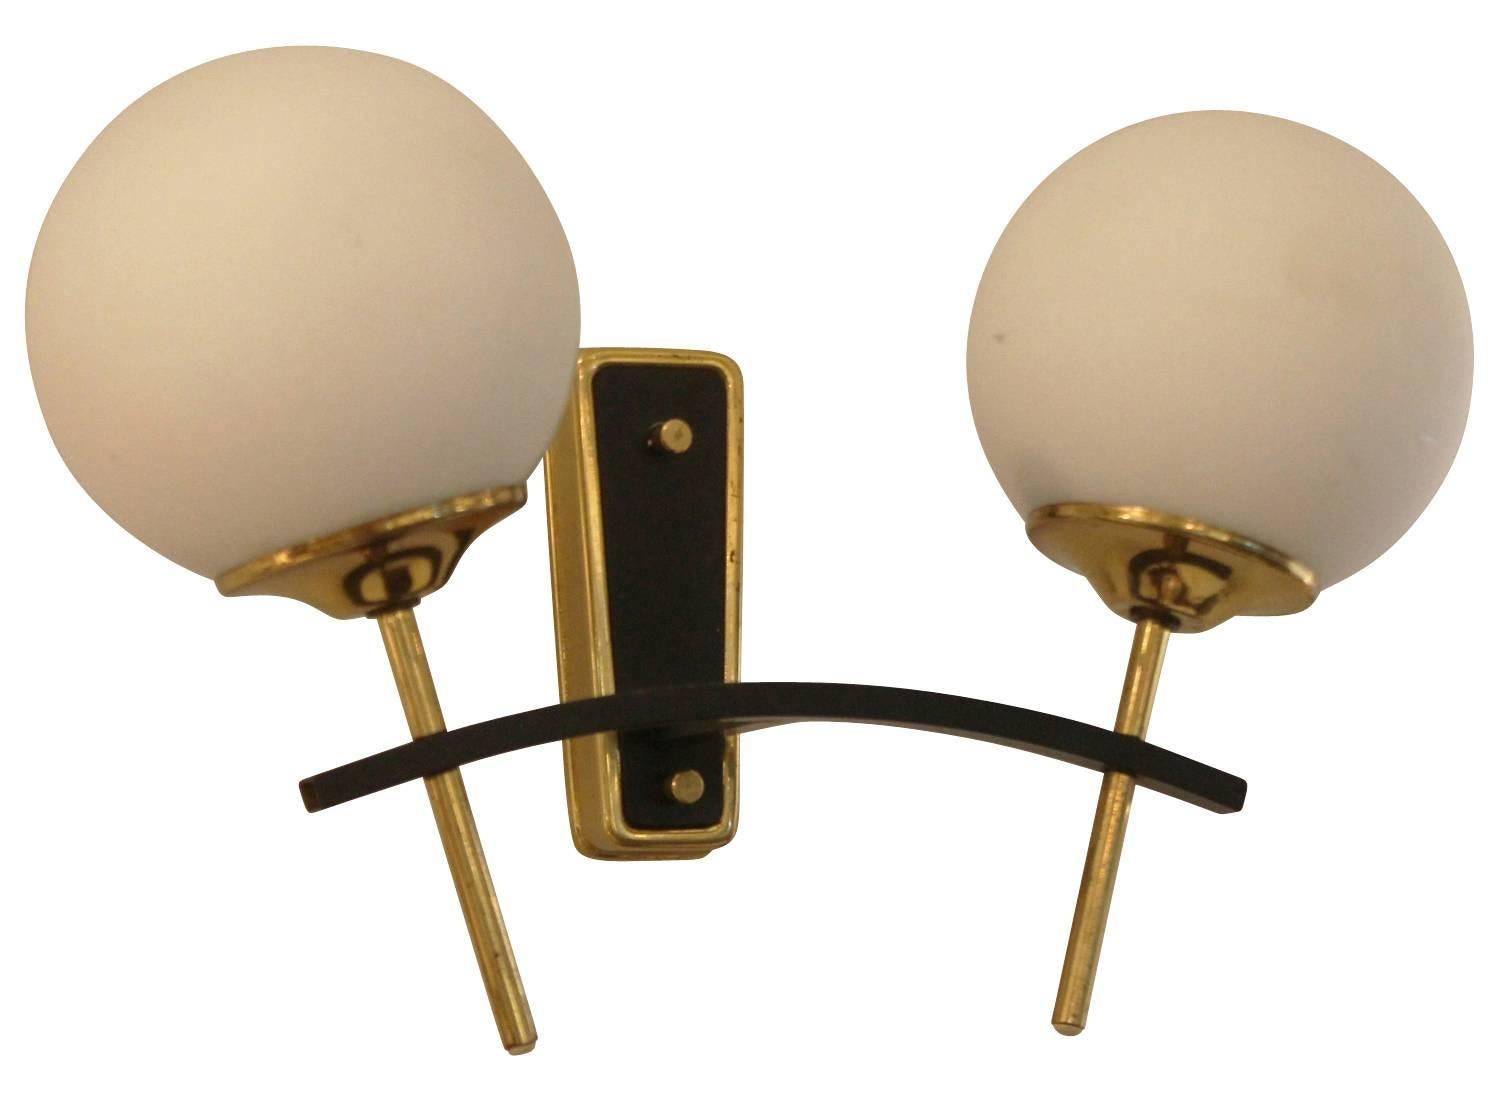 Exquisite pair of Stilnovo style sconces each holding two round frosted glass shades. The frame is brass and lacquered black in some sections.

Available for viewing at Gaspare Asaro-Italian Modern in NYC